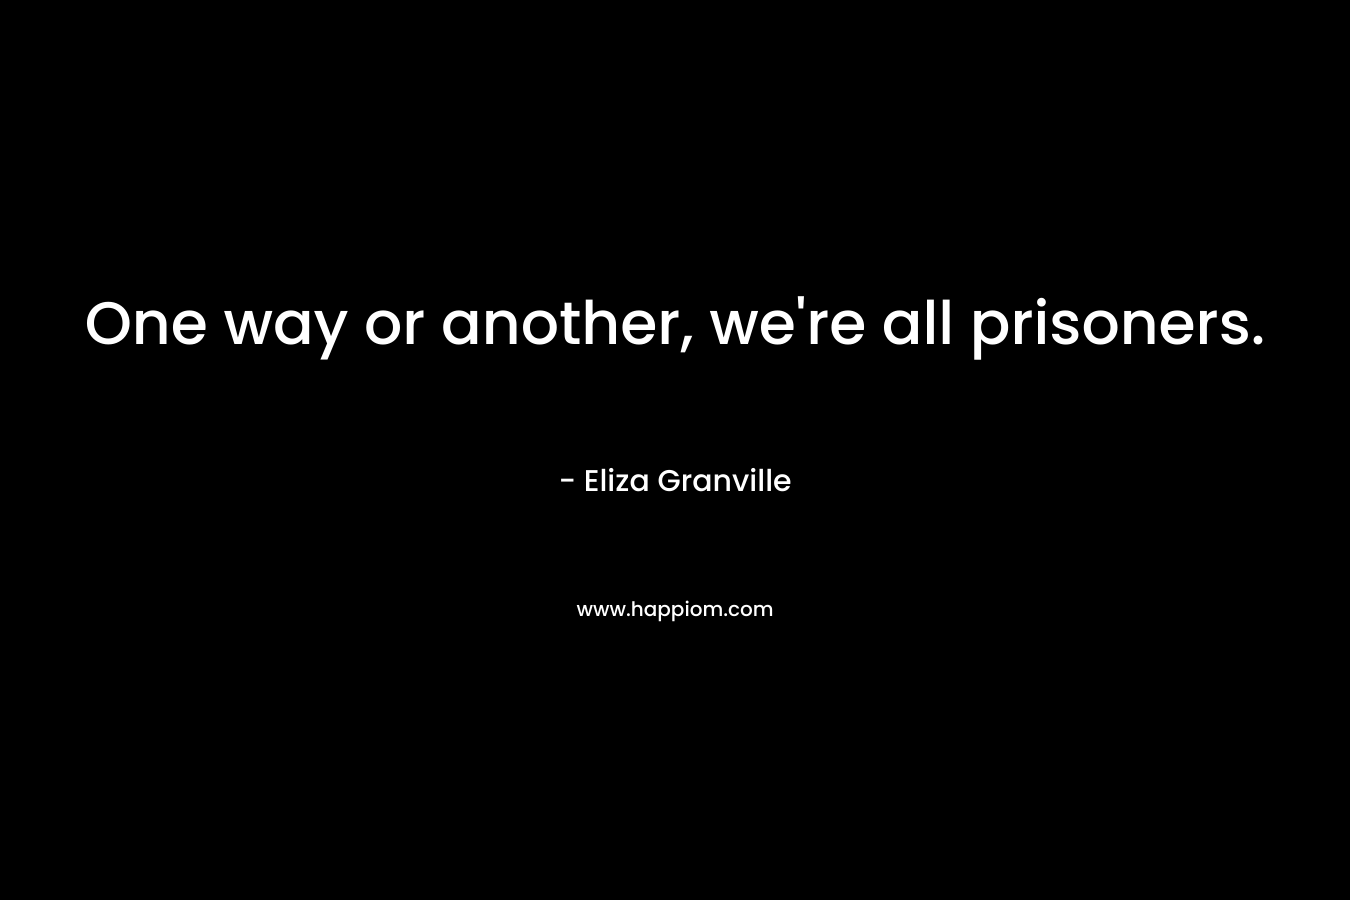 One way or another, we’re all prisoners. – Eliza Granville